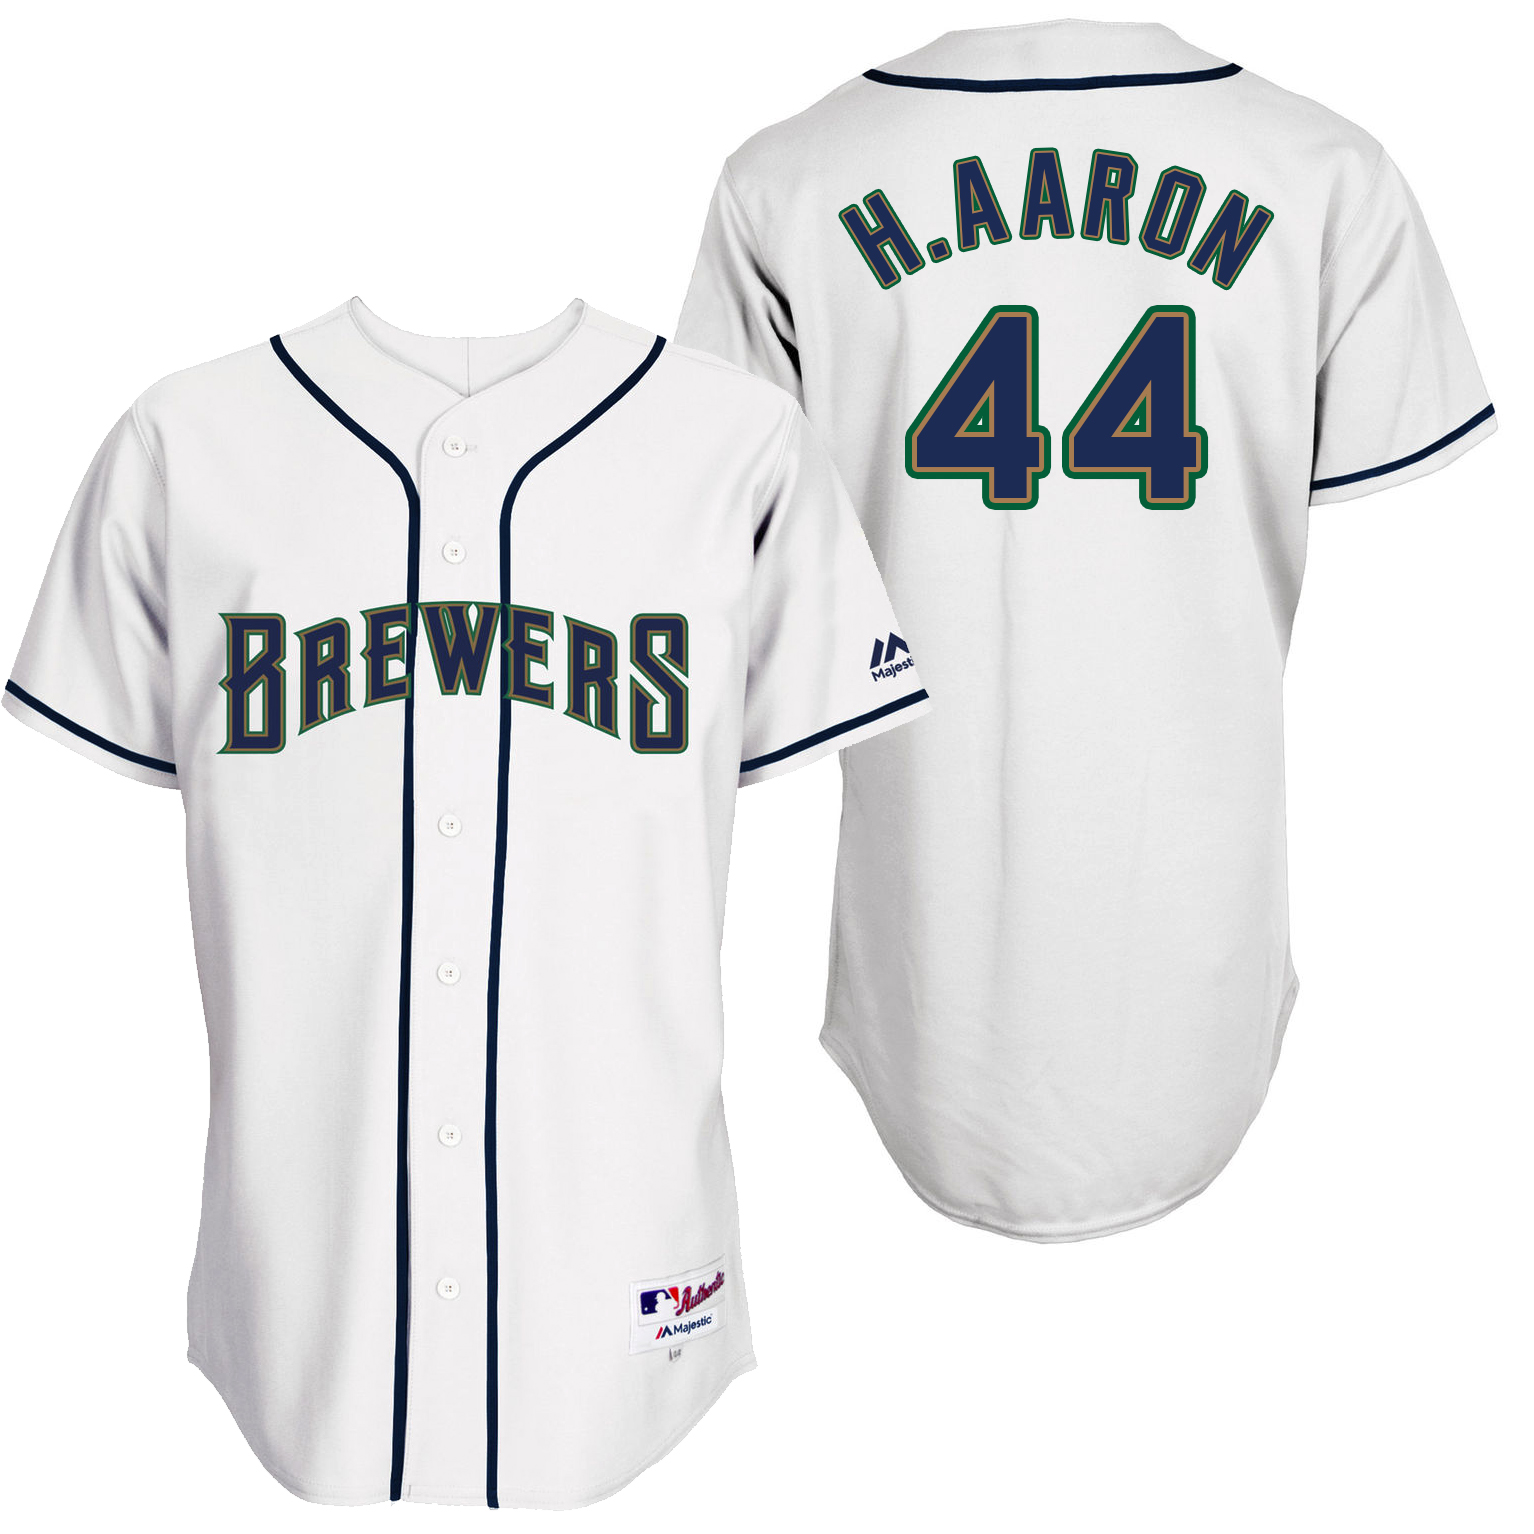 Brewers 44 Hank Aaron White Throwback Jersey